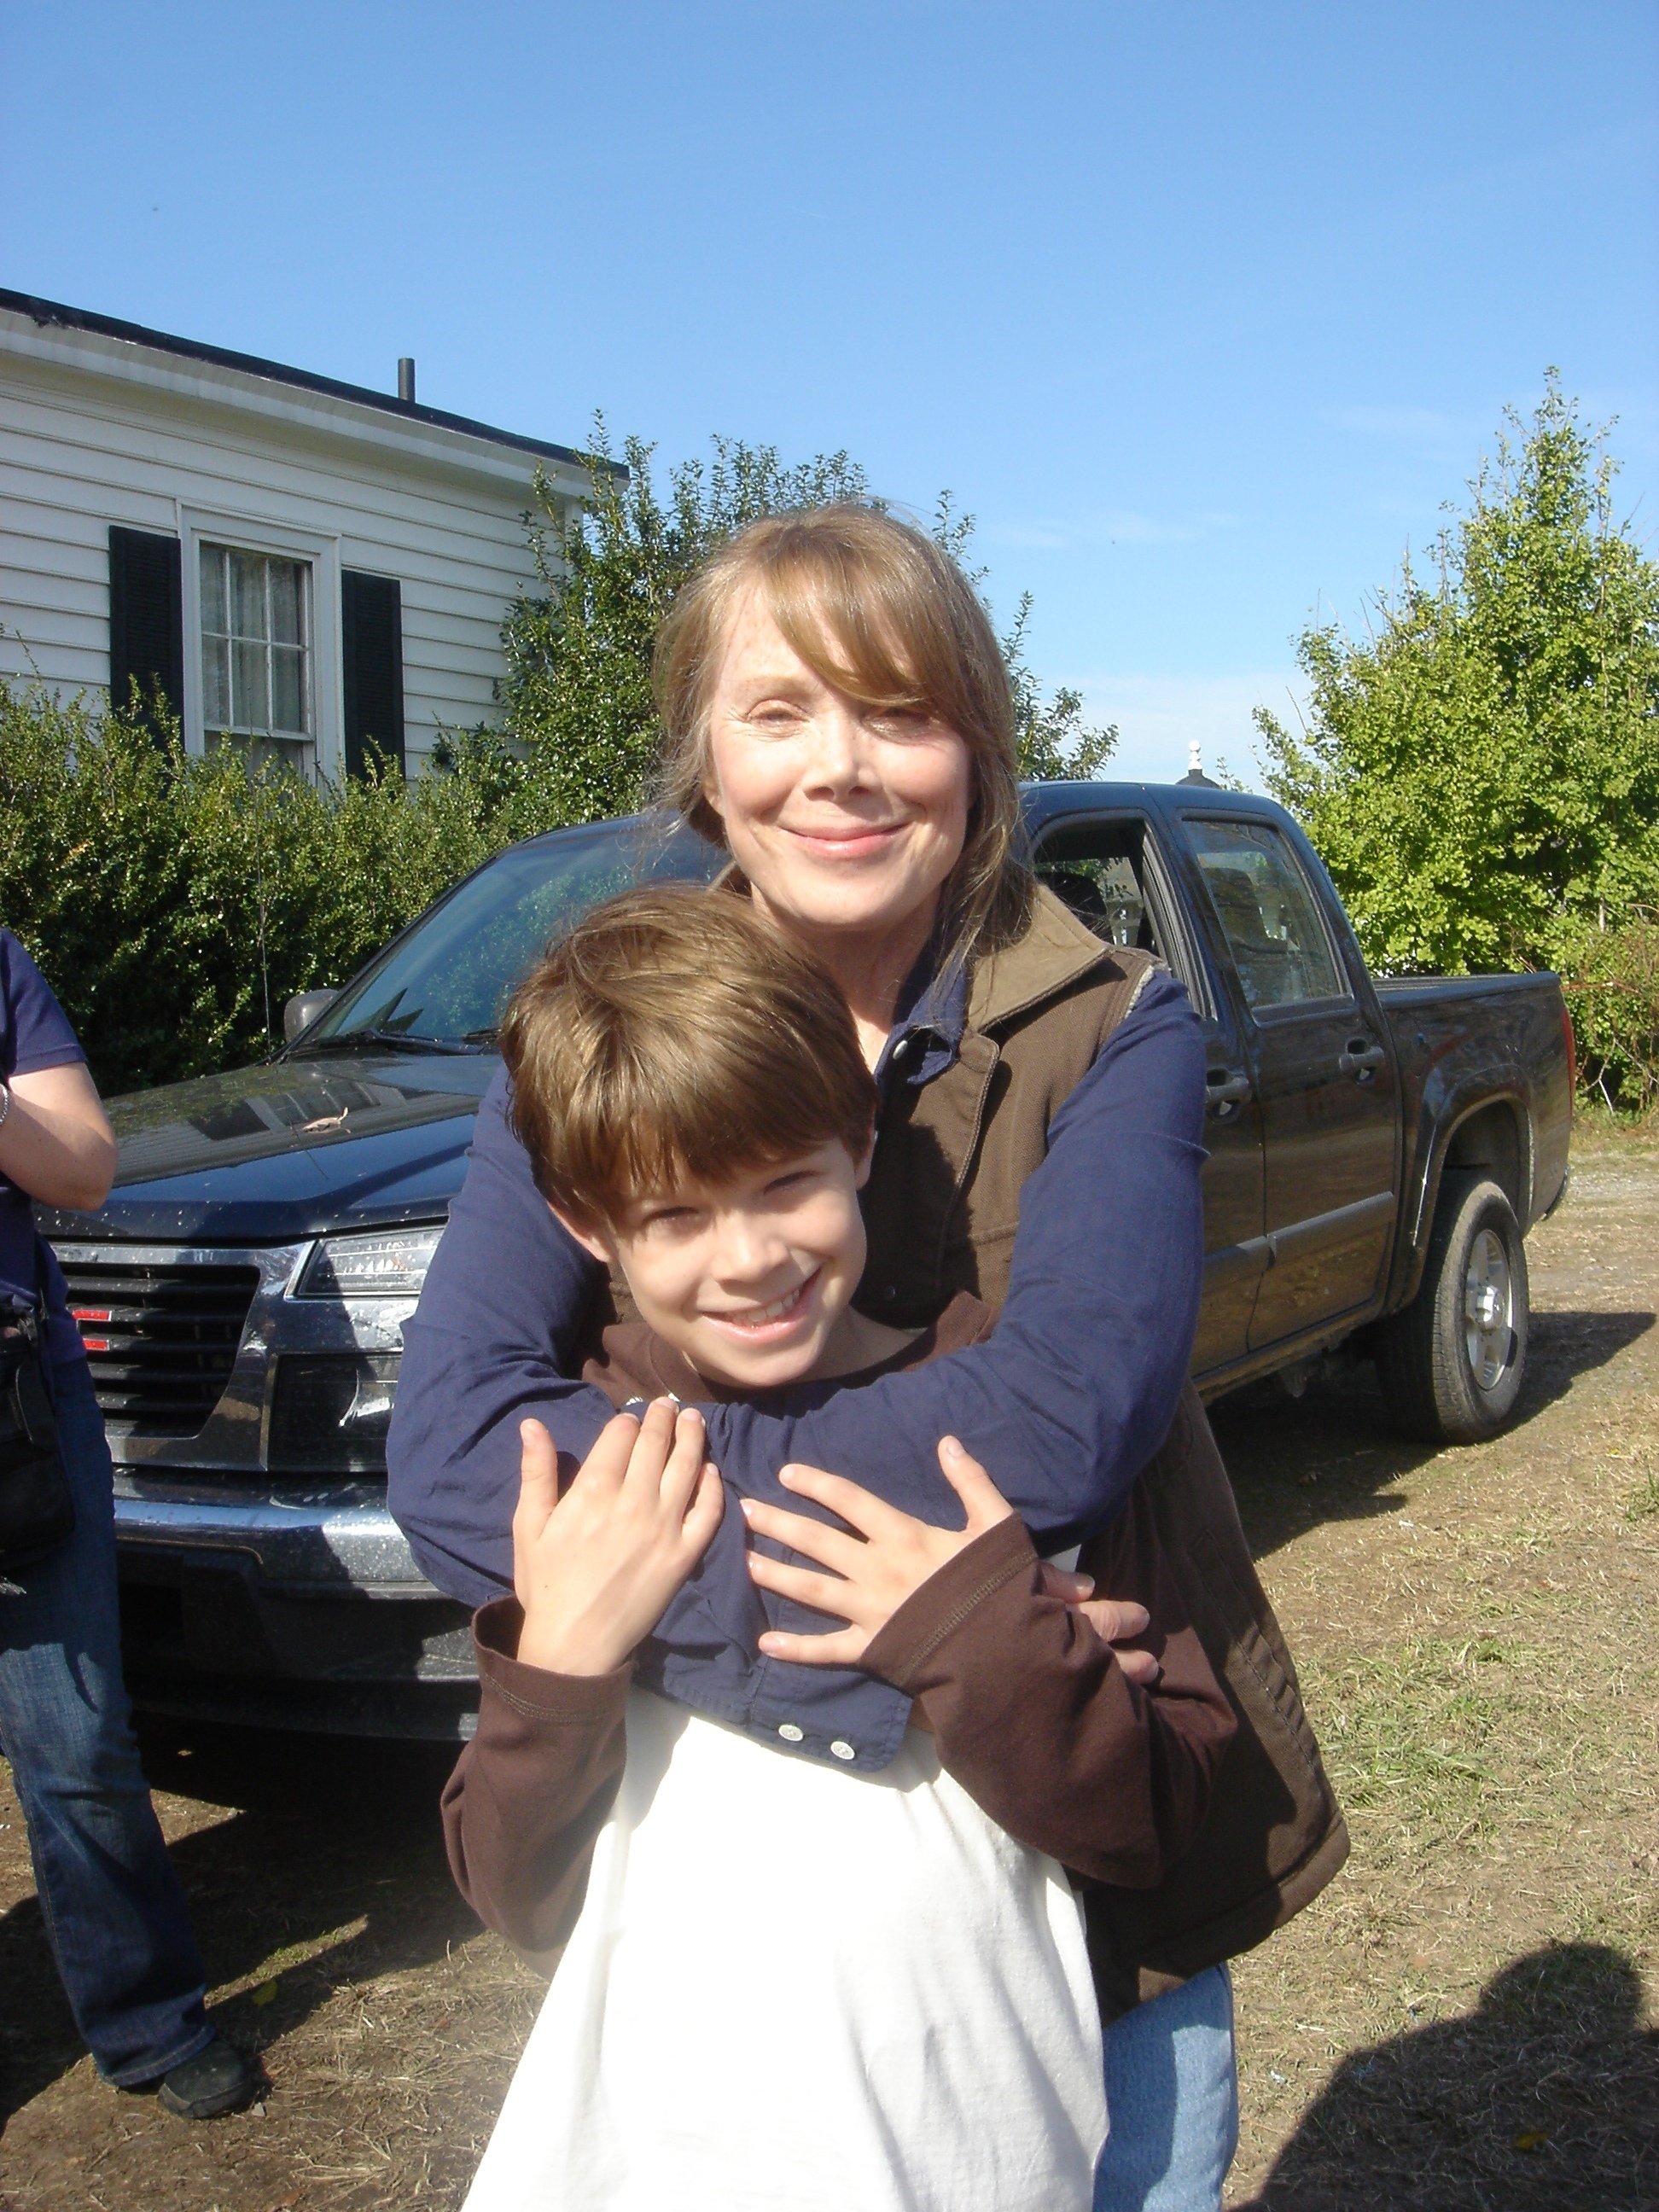 Colin Ford with Sissy Spacek on the set of Lake City